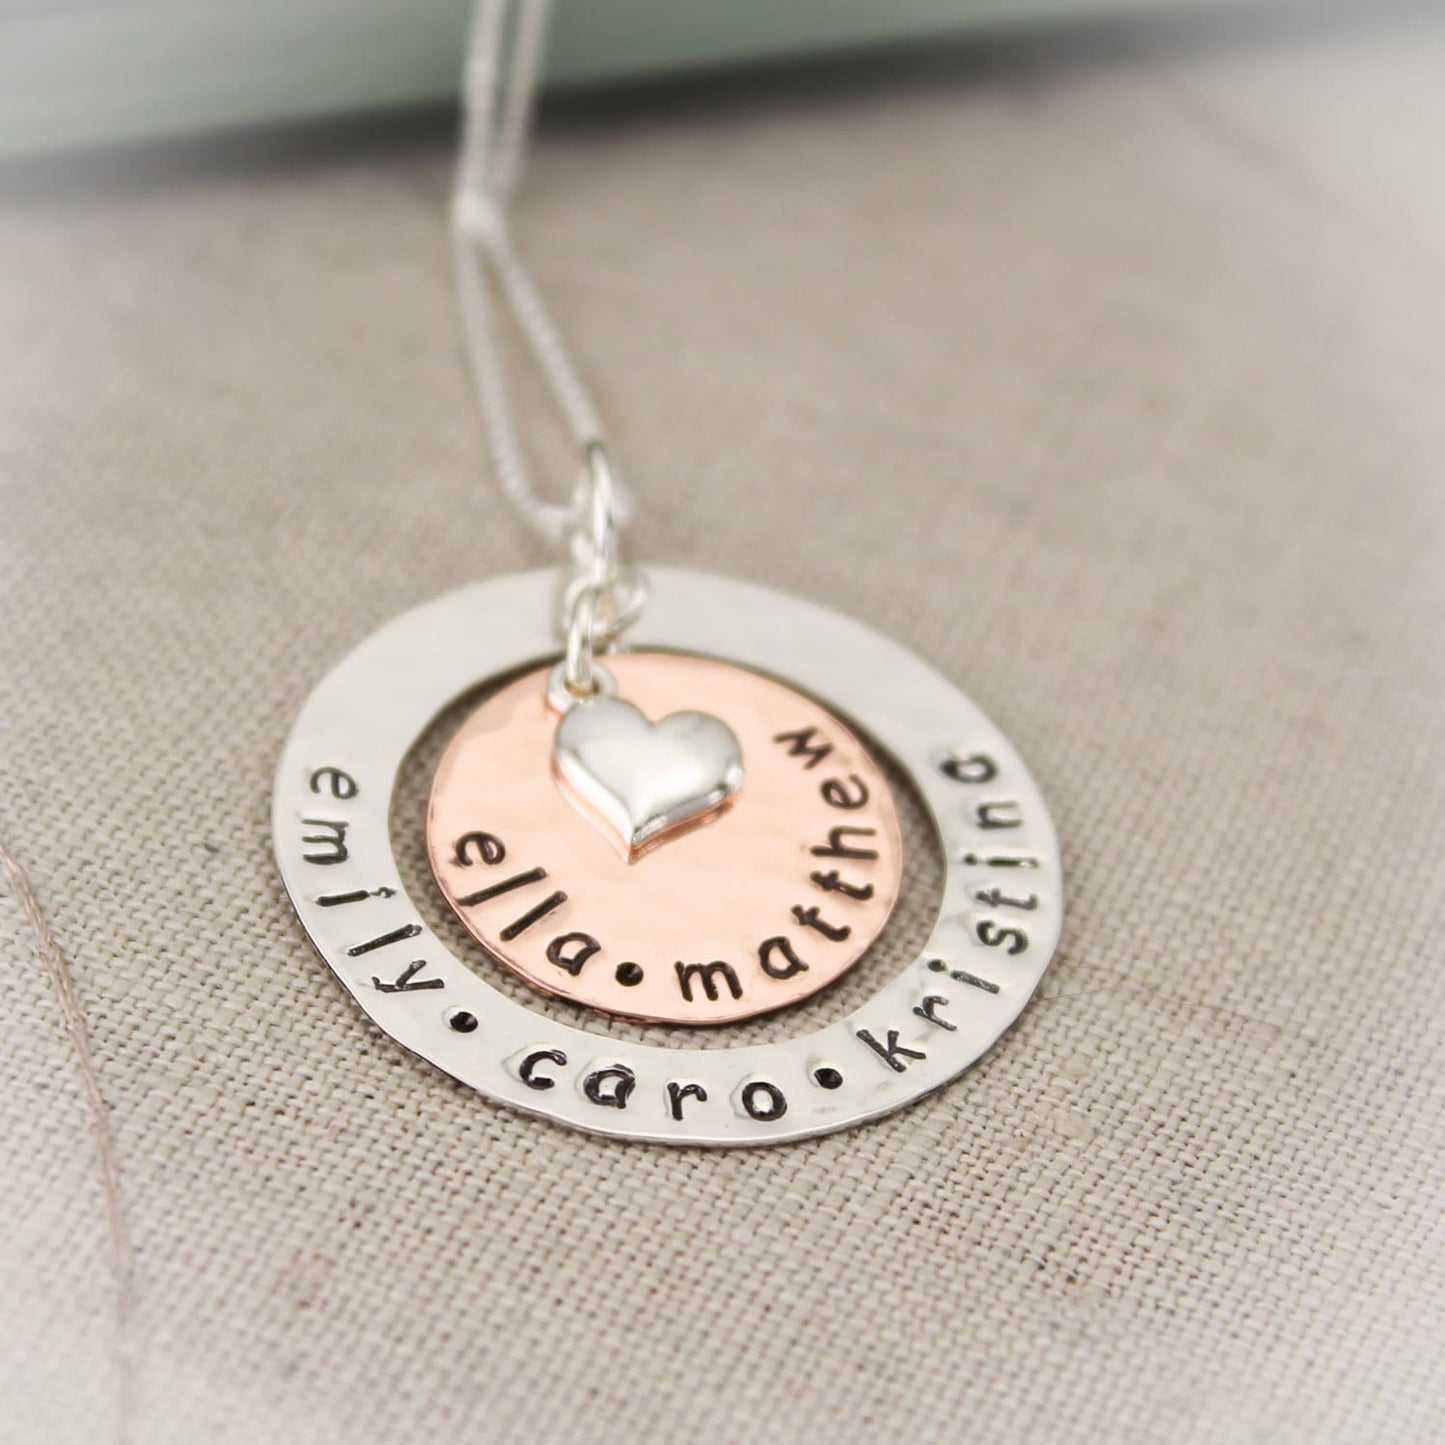 Sterling Silver Washer and Copper Personalized  Necklace with Heart Charm Grandmother or Mother Necklace Hand Stamped Jewelry